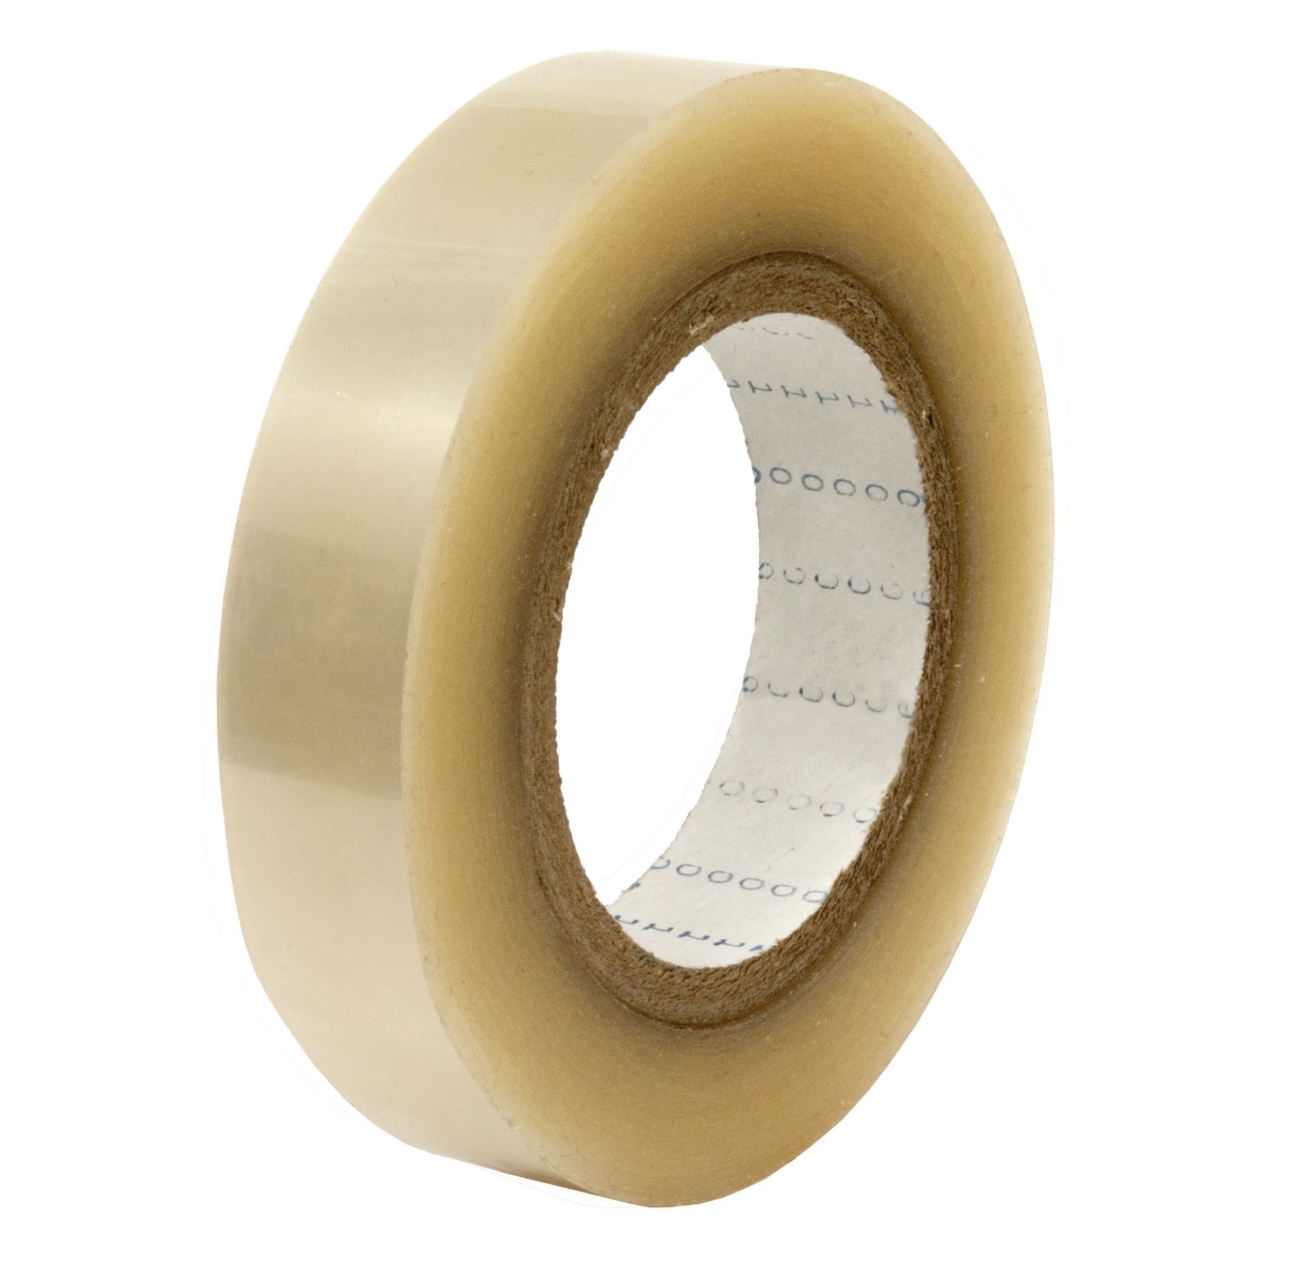 S-K-S dubbelzijdige kleefband met polyester drager 960, transparant, 30 mm x 66 m, siliconen kleefband, 0,085 mm